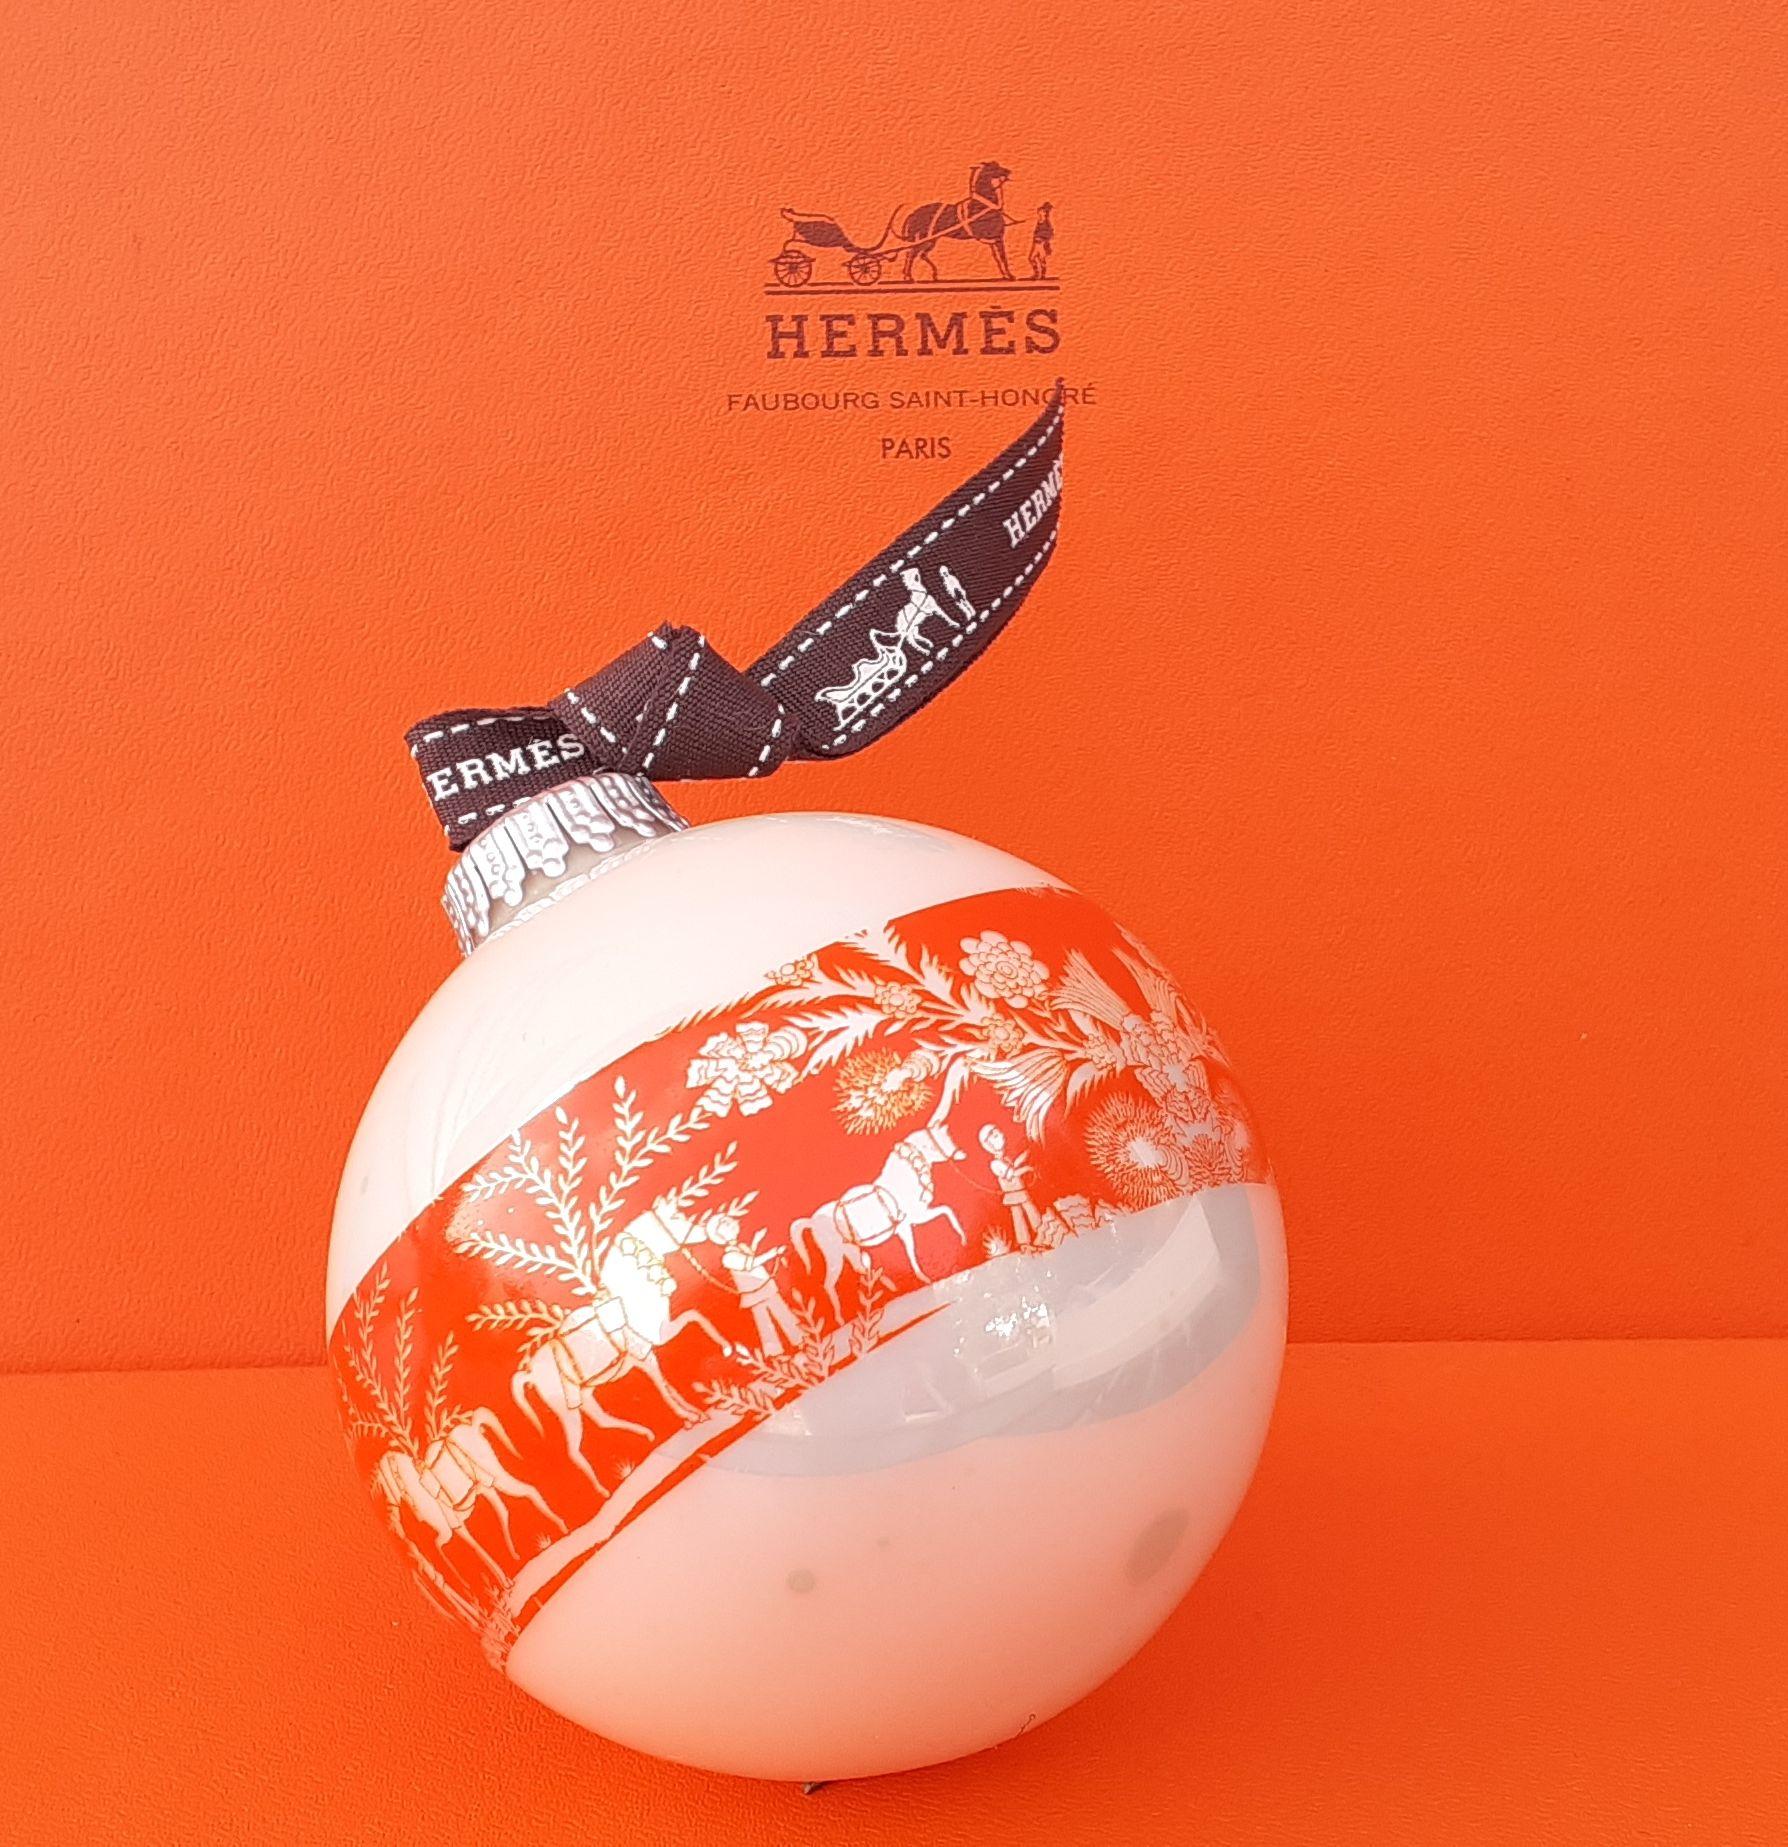 Rare Authentic Hermès Christmas Ball

The pattern comes from the 